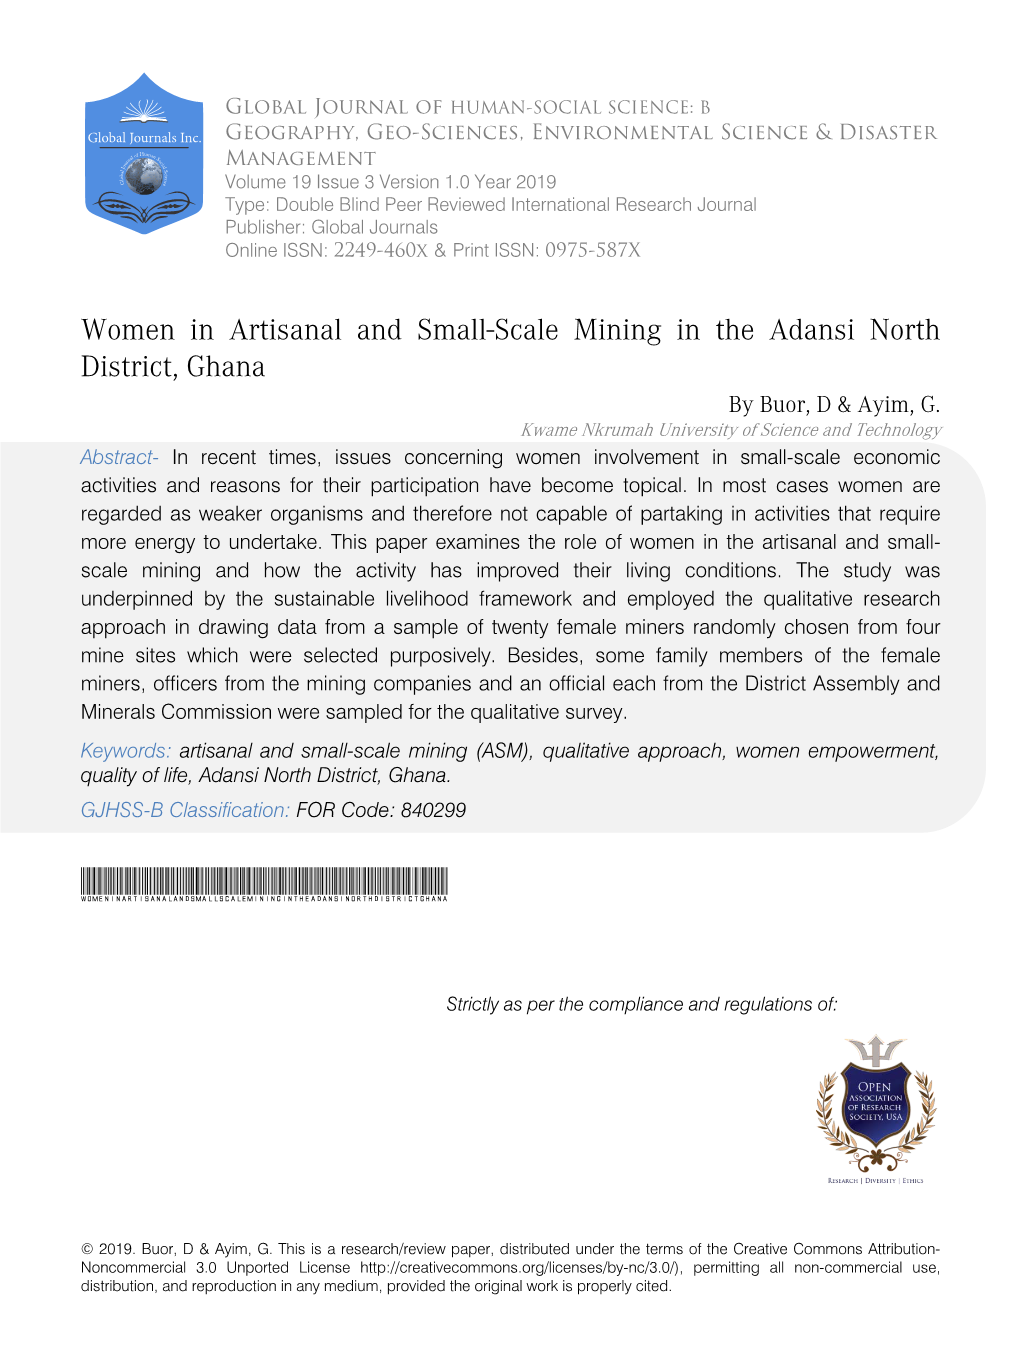 Women in Artisanal and Small-Scale Mining in the Adansi North District, Ghana by Buor, D & Ayim, G